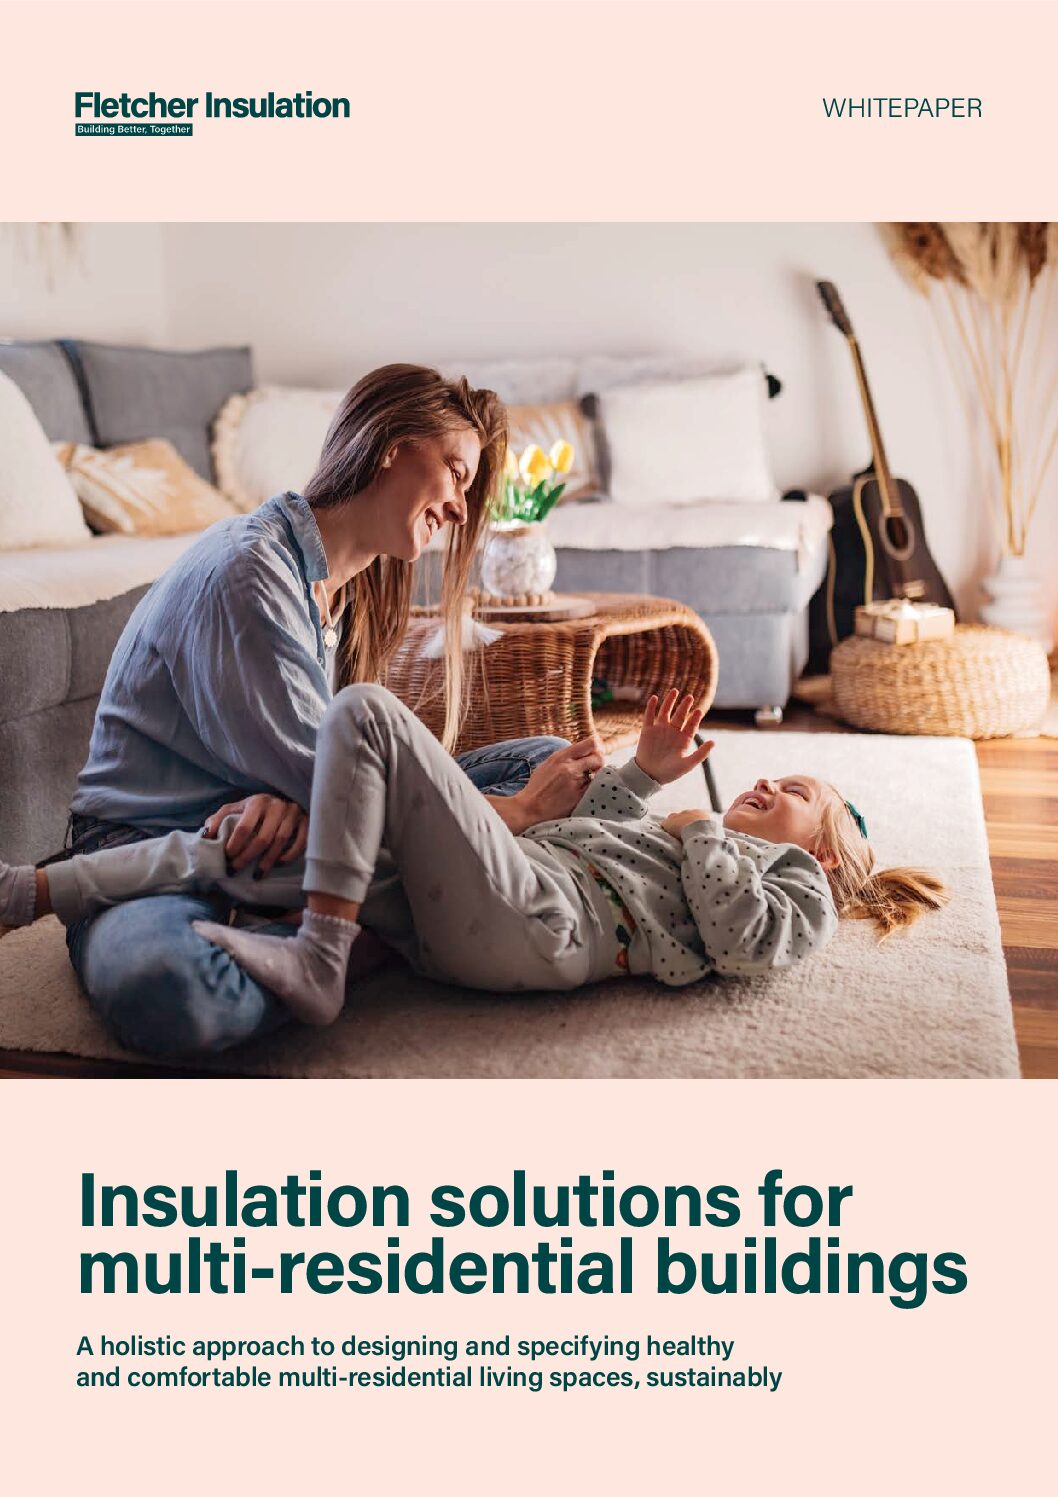 Whitepaper – Insulation Solutions for Multi-residential buildings